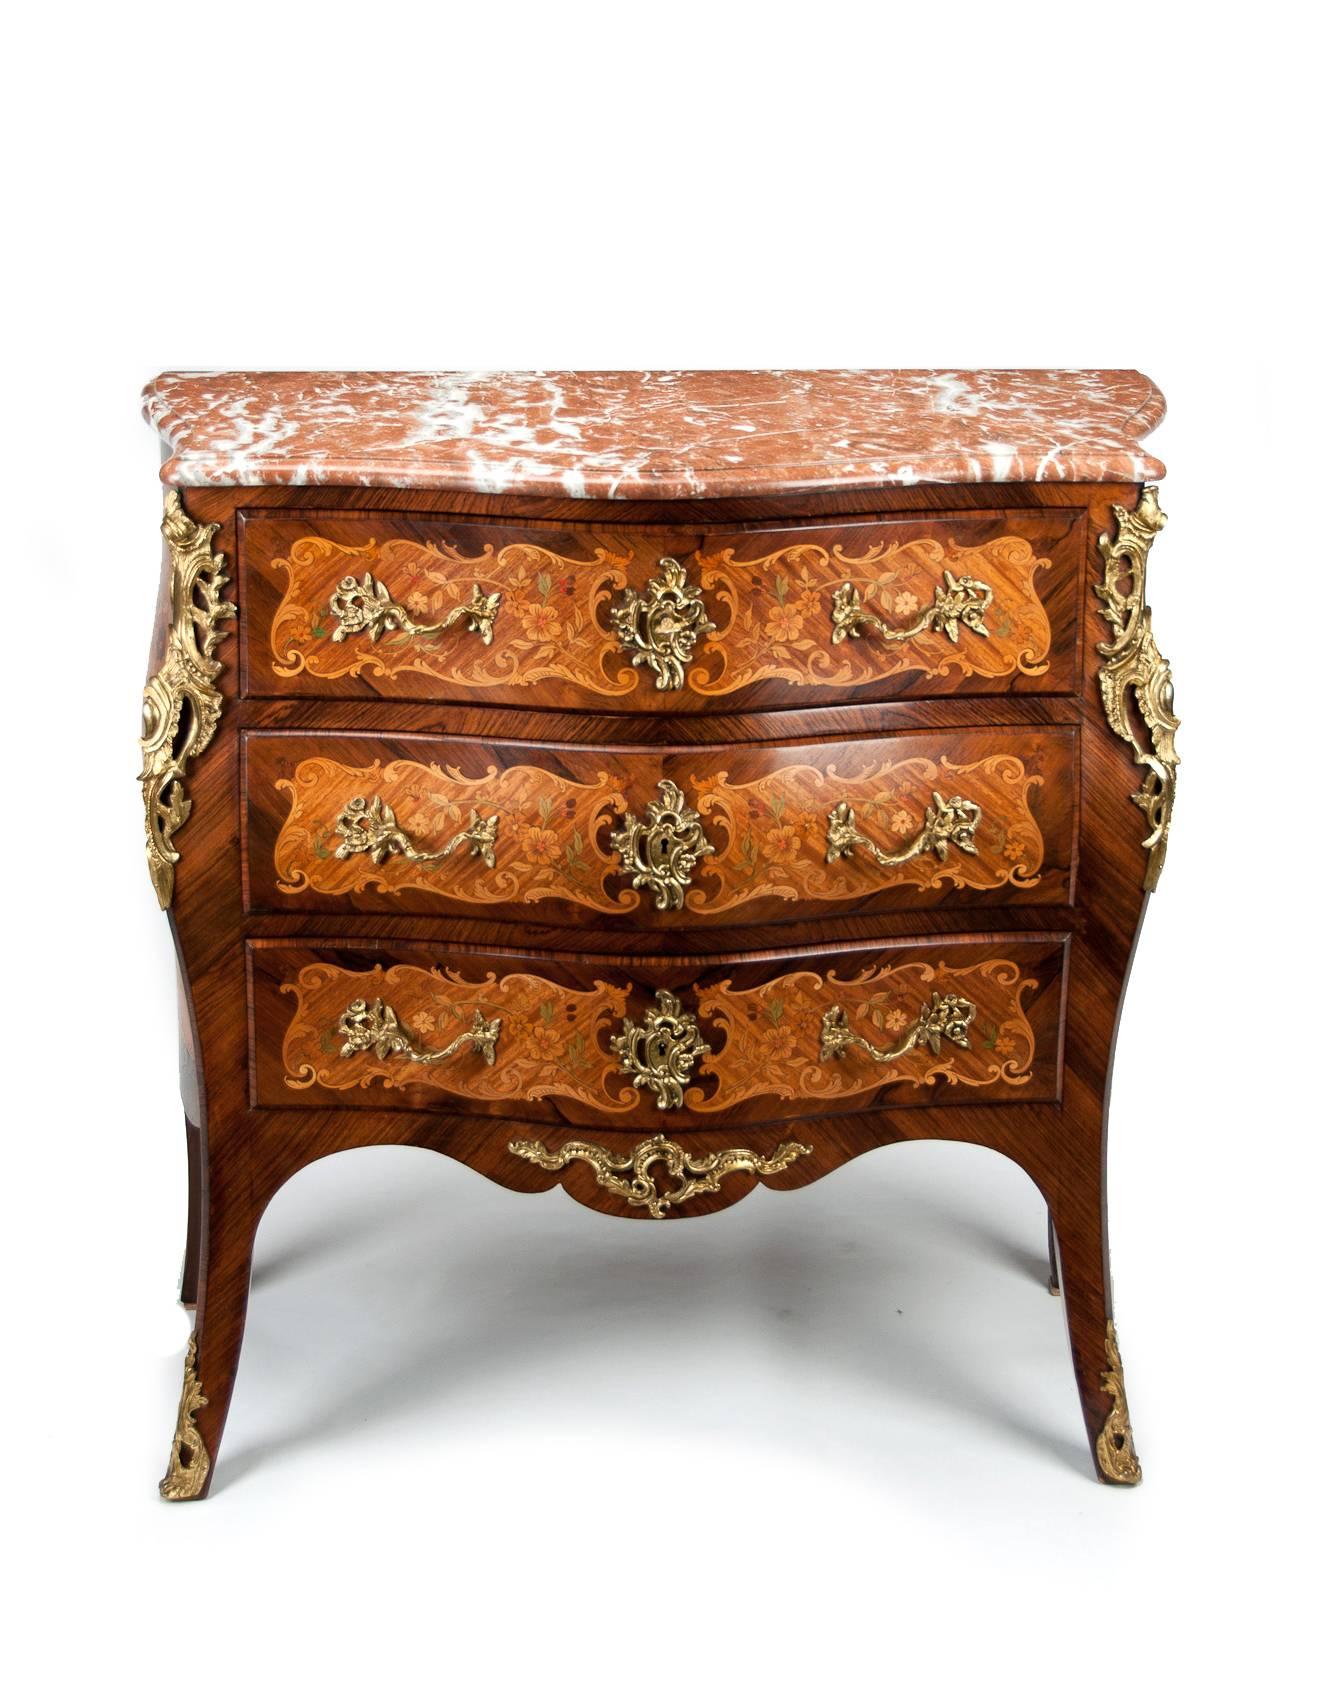 Fine French Louis XV Style Inlaid Bombe Marble Topped Commode 1